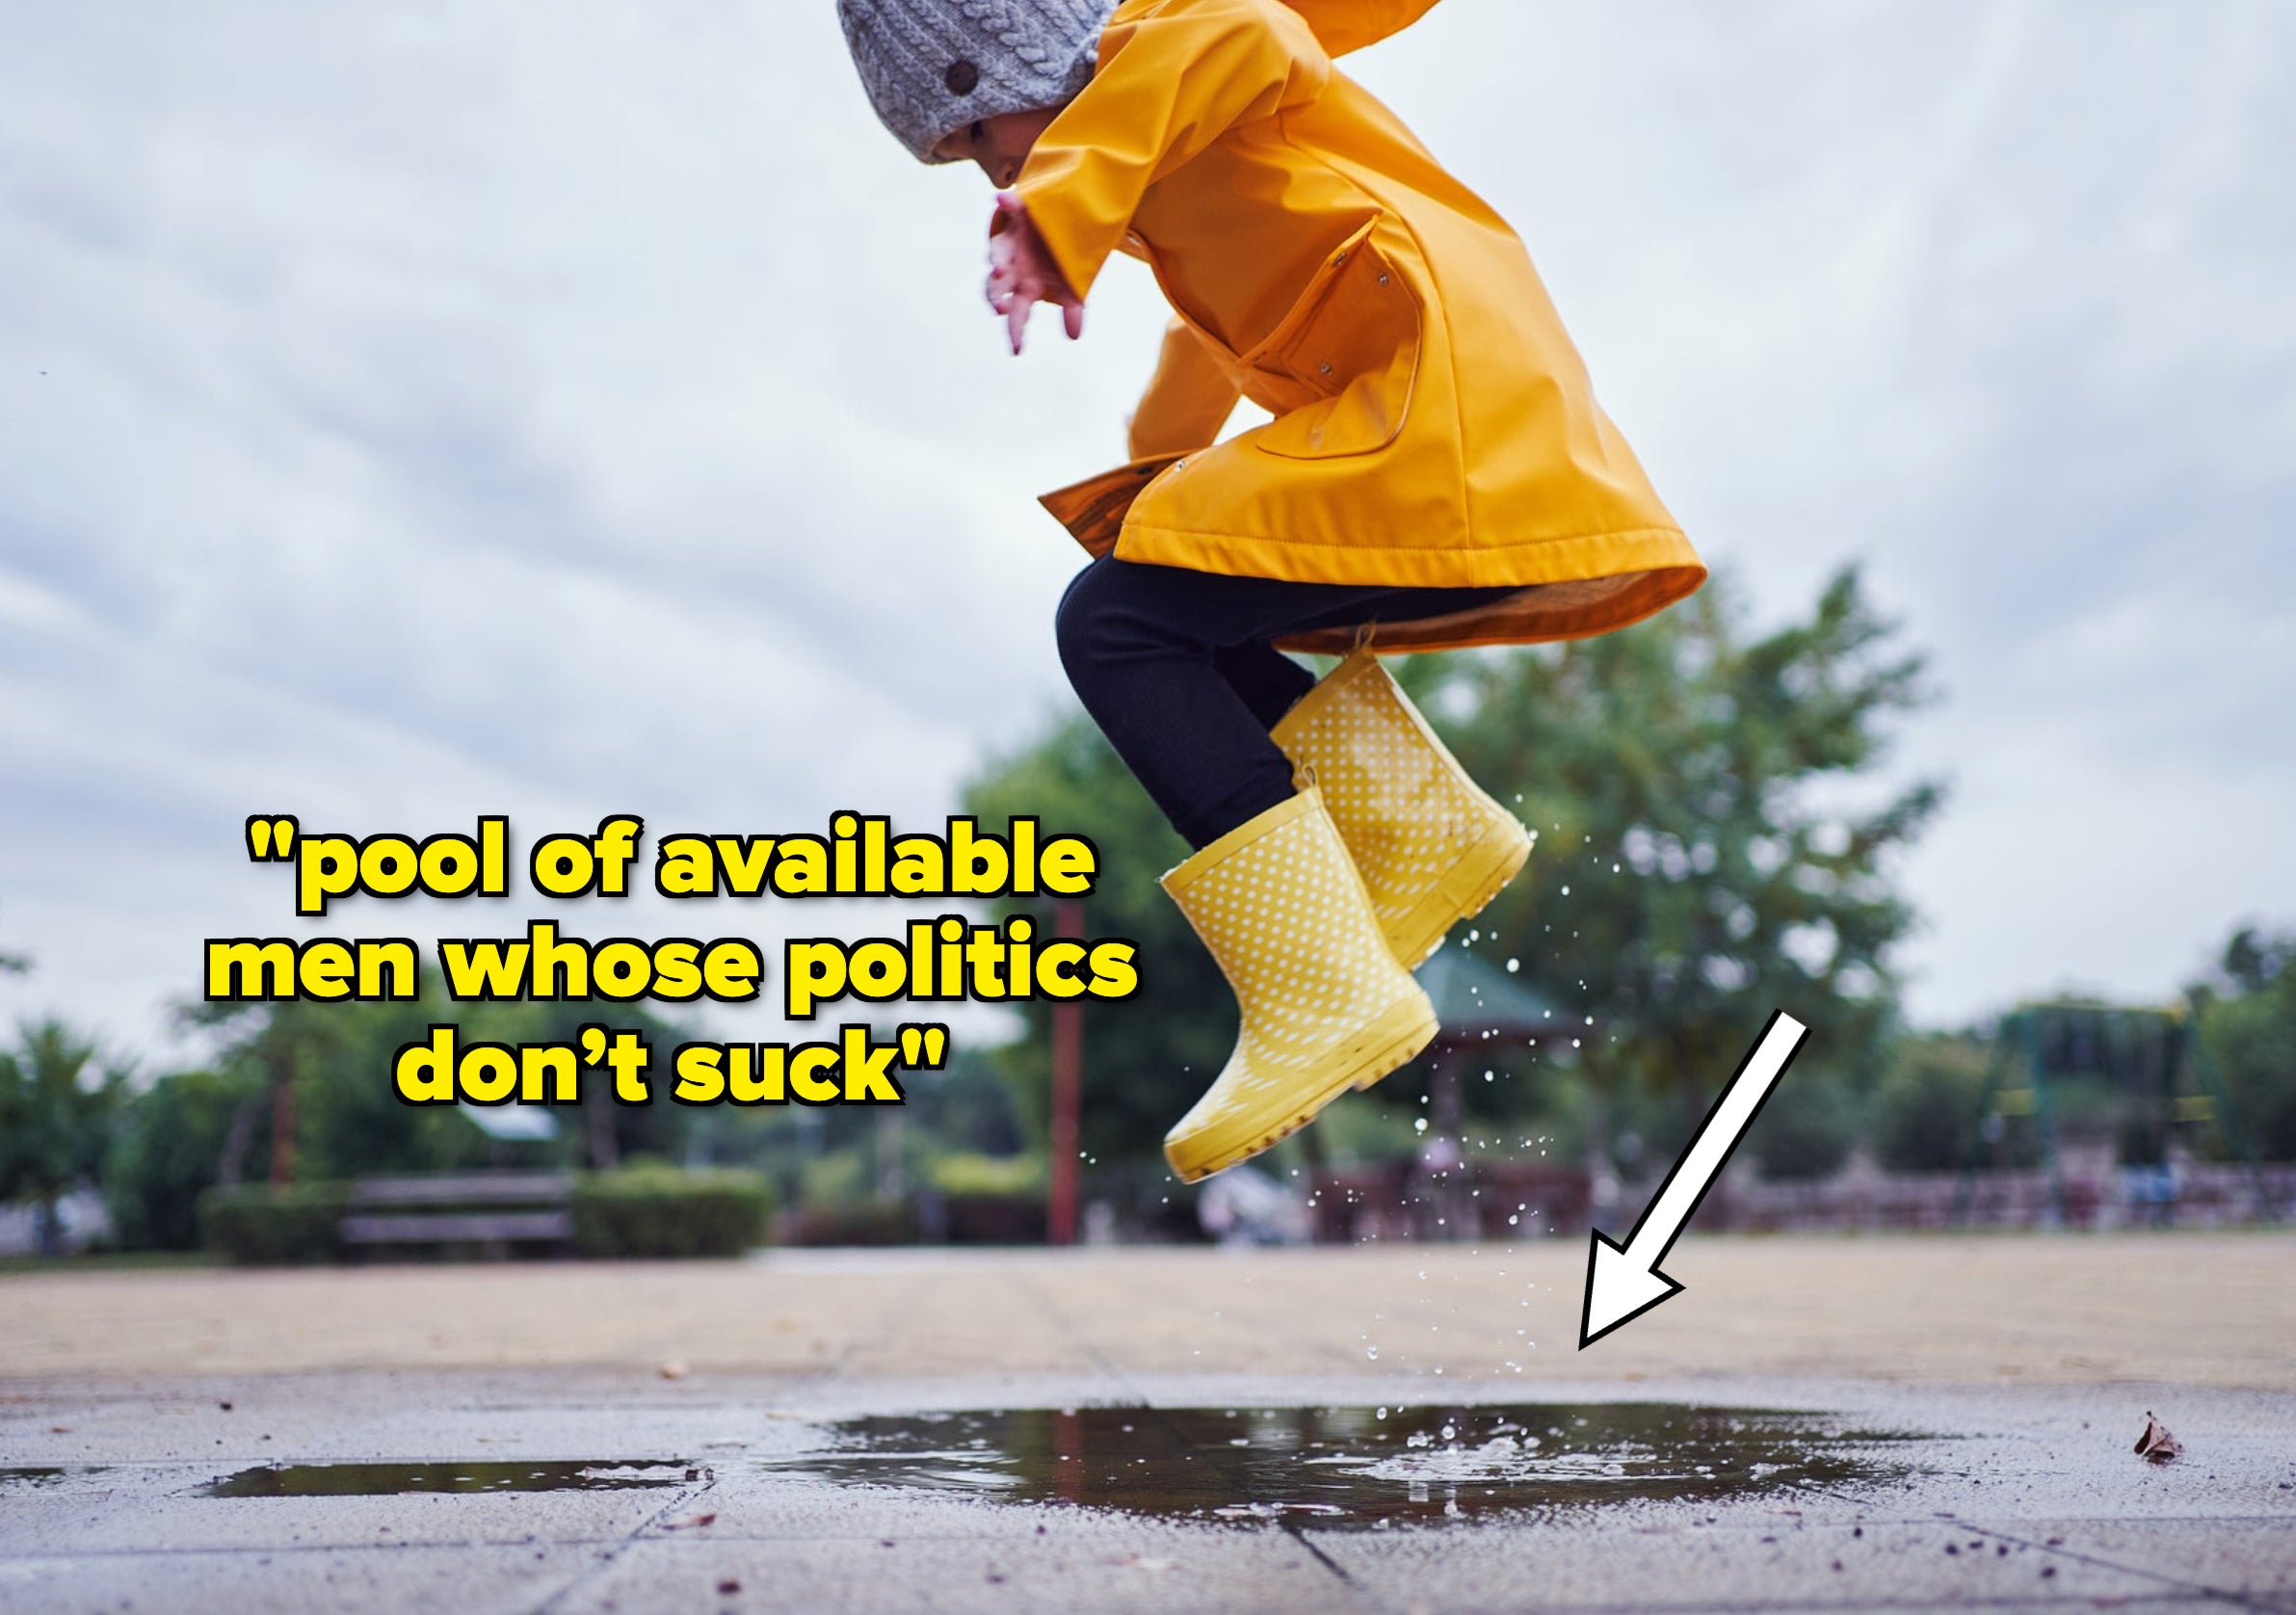 Cute and playful female child jumping in a puddle of water on the street wearing yellow rubber boots and a raincoat